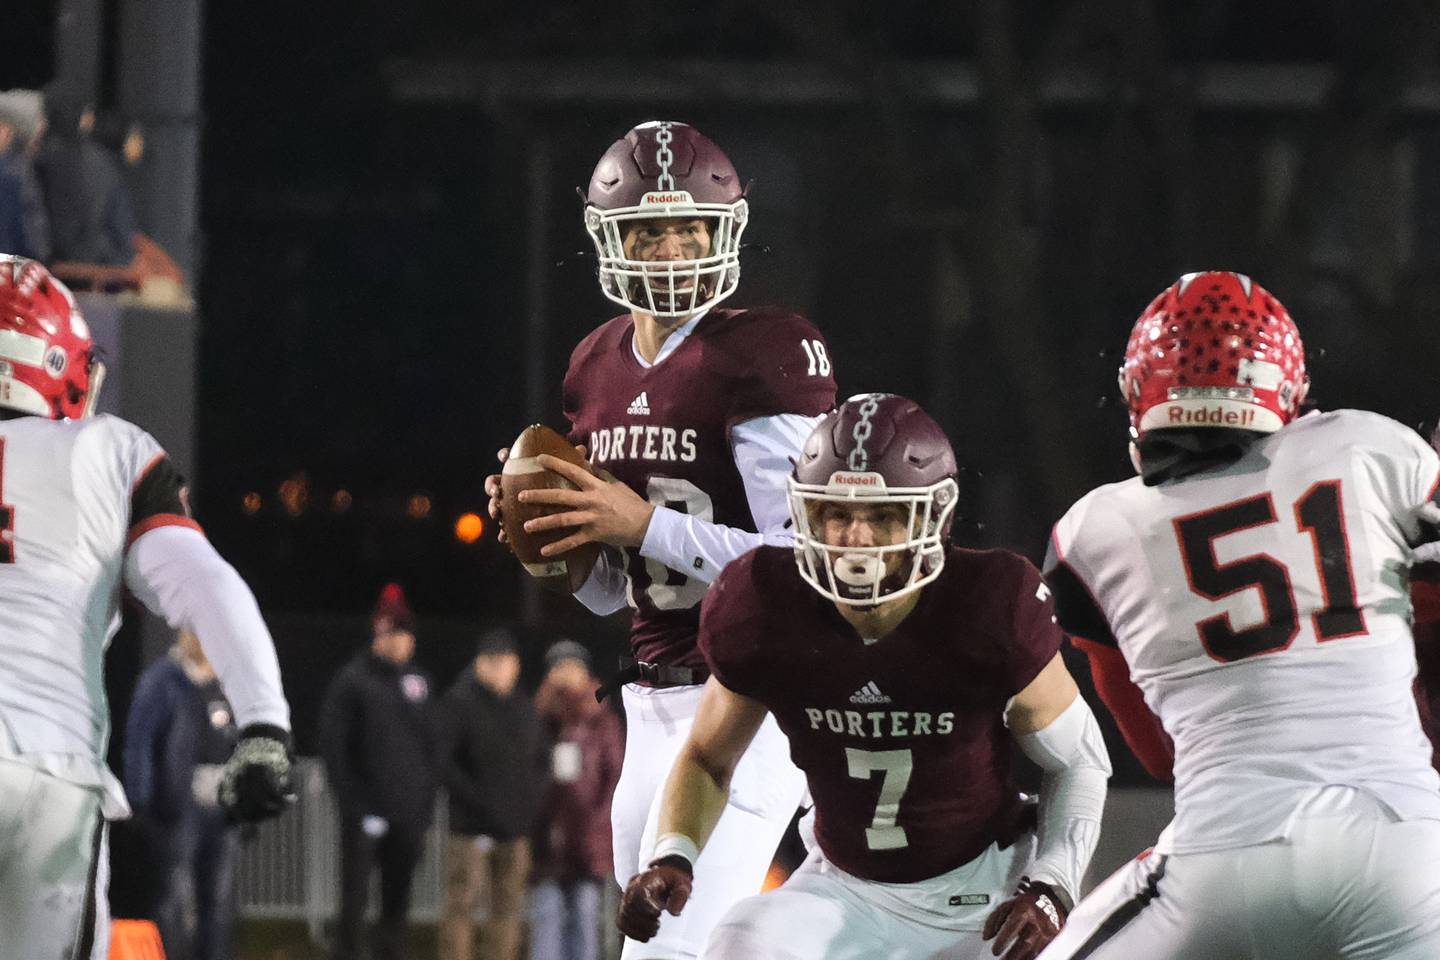 Lockports Hayden Timosciek looks to pass against Maine South in the Class 8A state championship at NIU Huskie Stadium. Saturday, Nov. 27, 2021 in DeKalb.